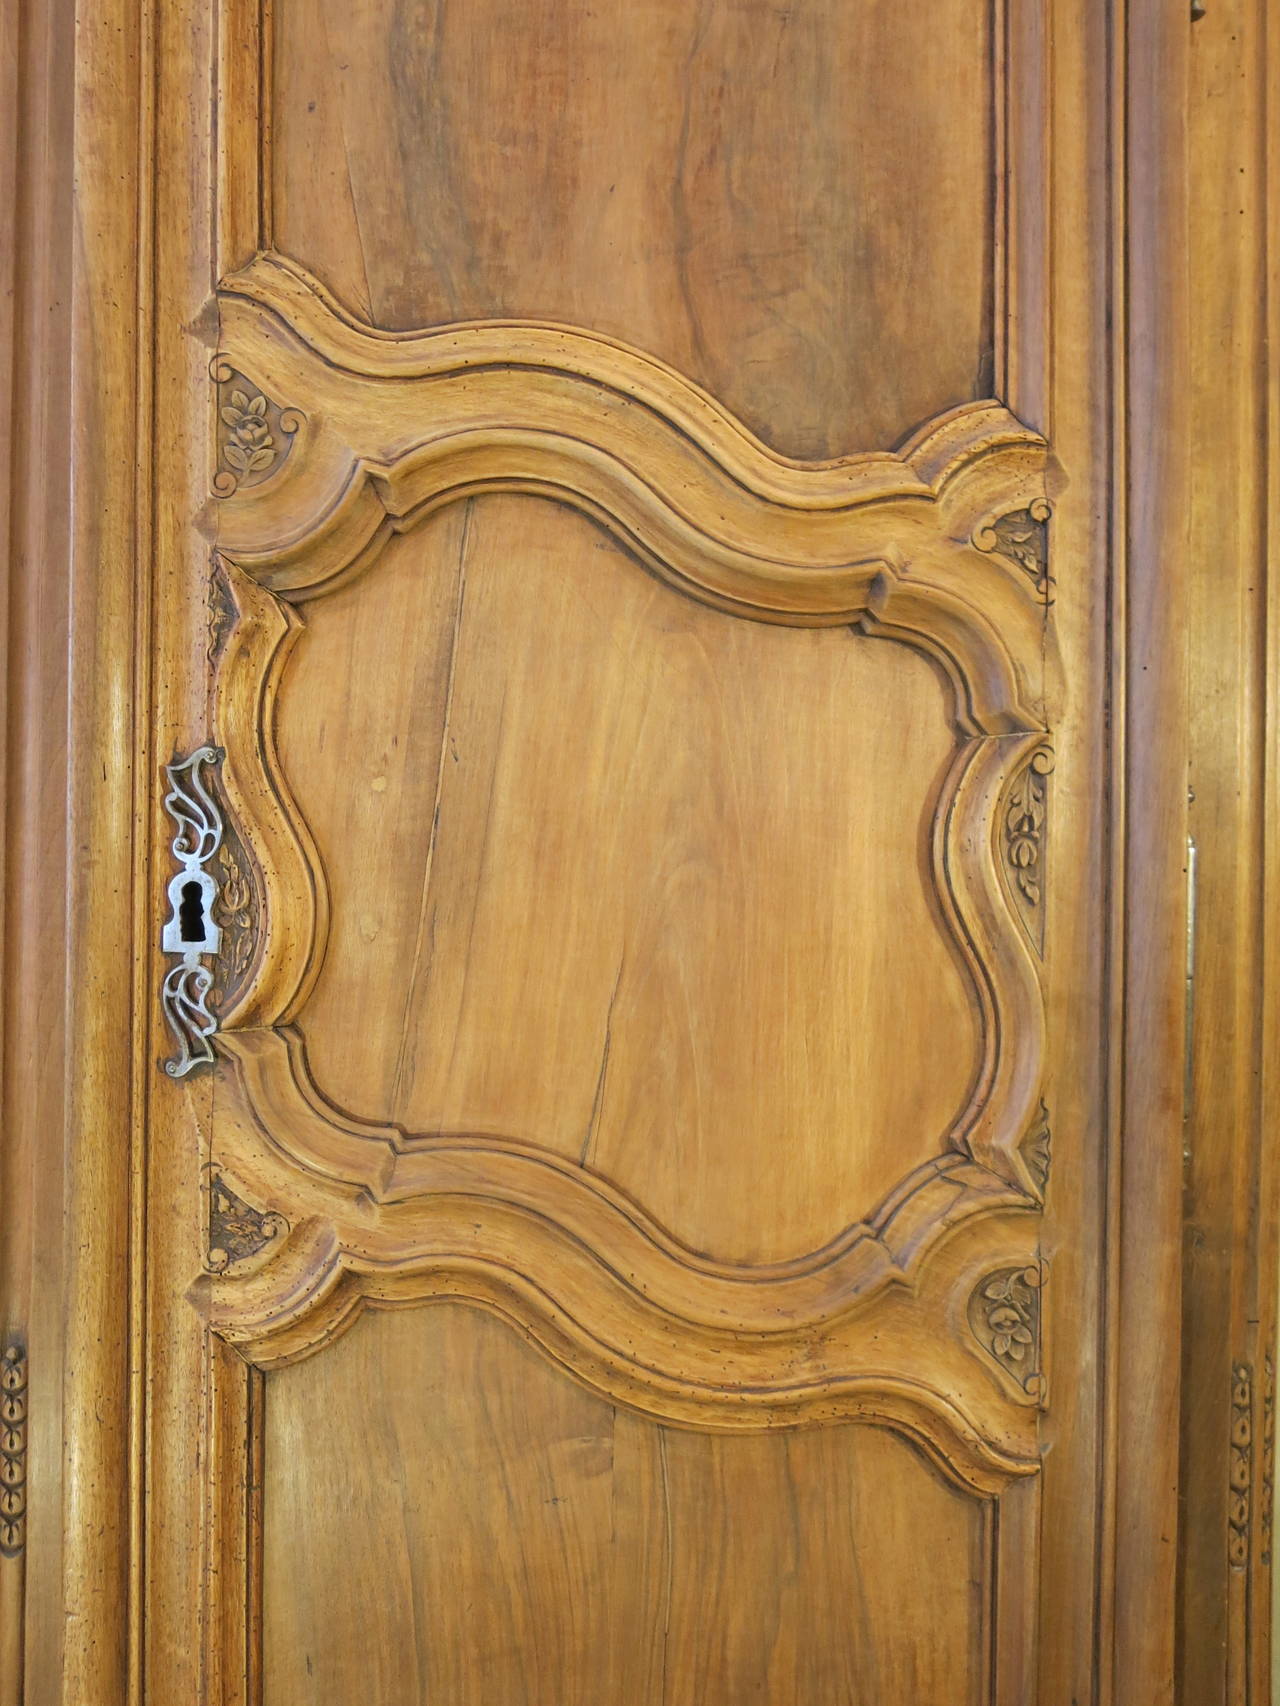 18th Century Period Regence, Louis XV Grand Walnut Armoire In Good Condition For Sale In New Orleans, LA